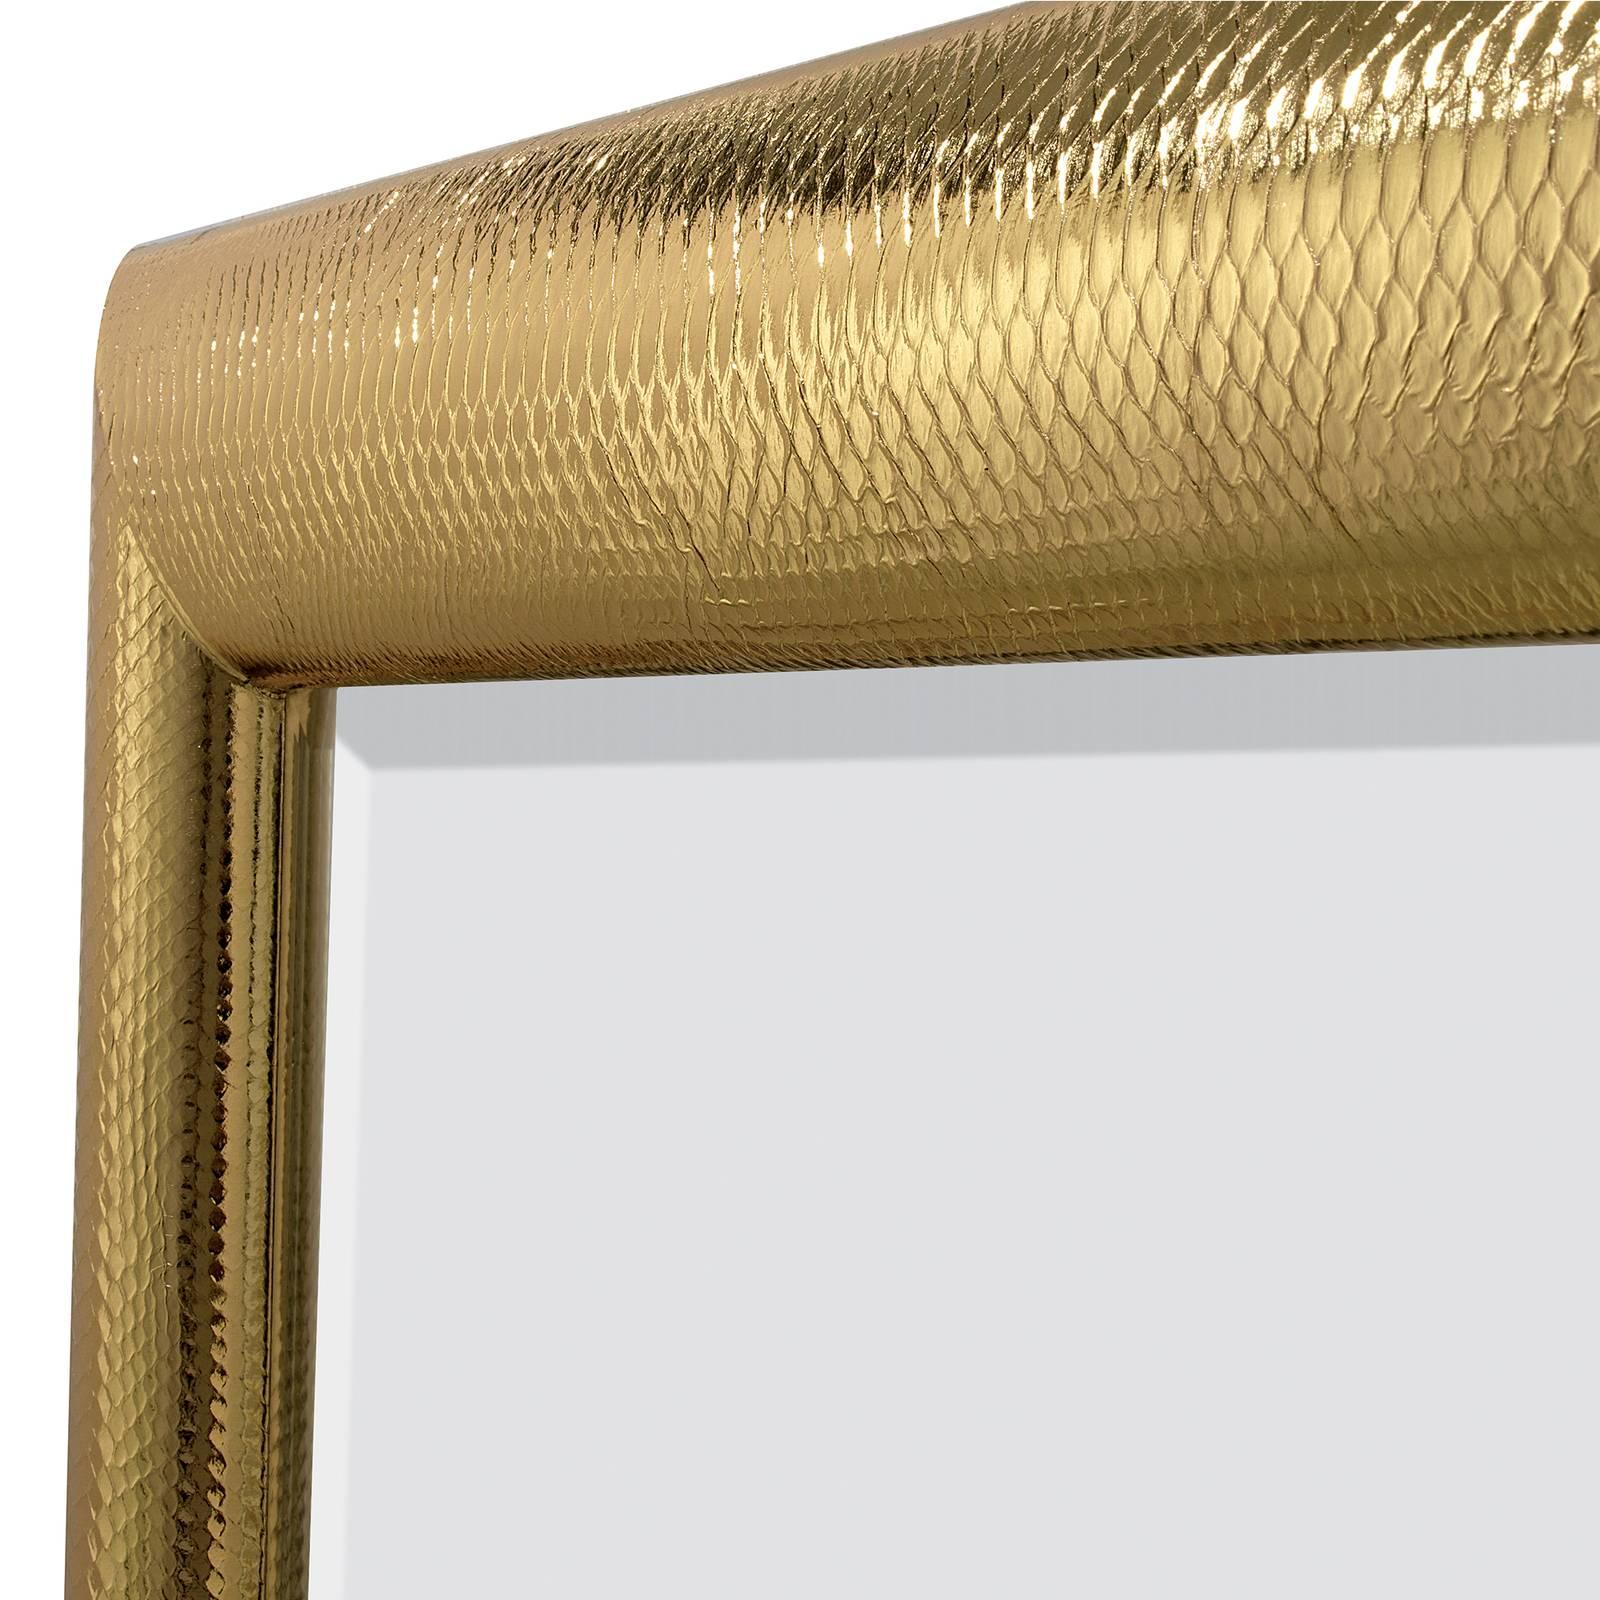 Sumptuous and elegant, this stunning mirror boasts a genuine python leather upholster over the wooden frame that was covered in striking gold. The effect is a unique piece of functional decor that will be a perfect complement to a colorful